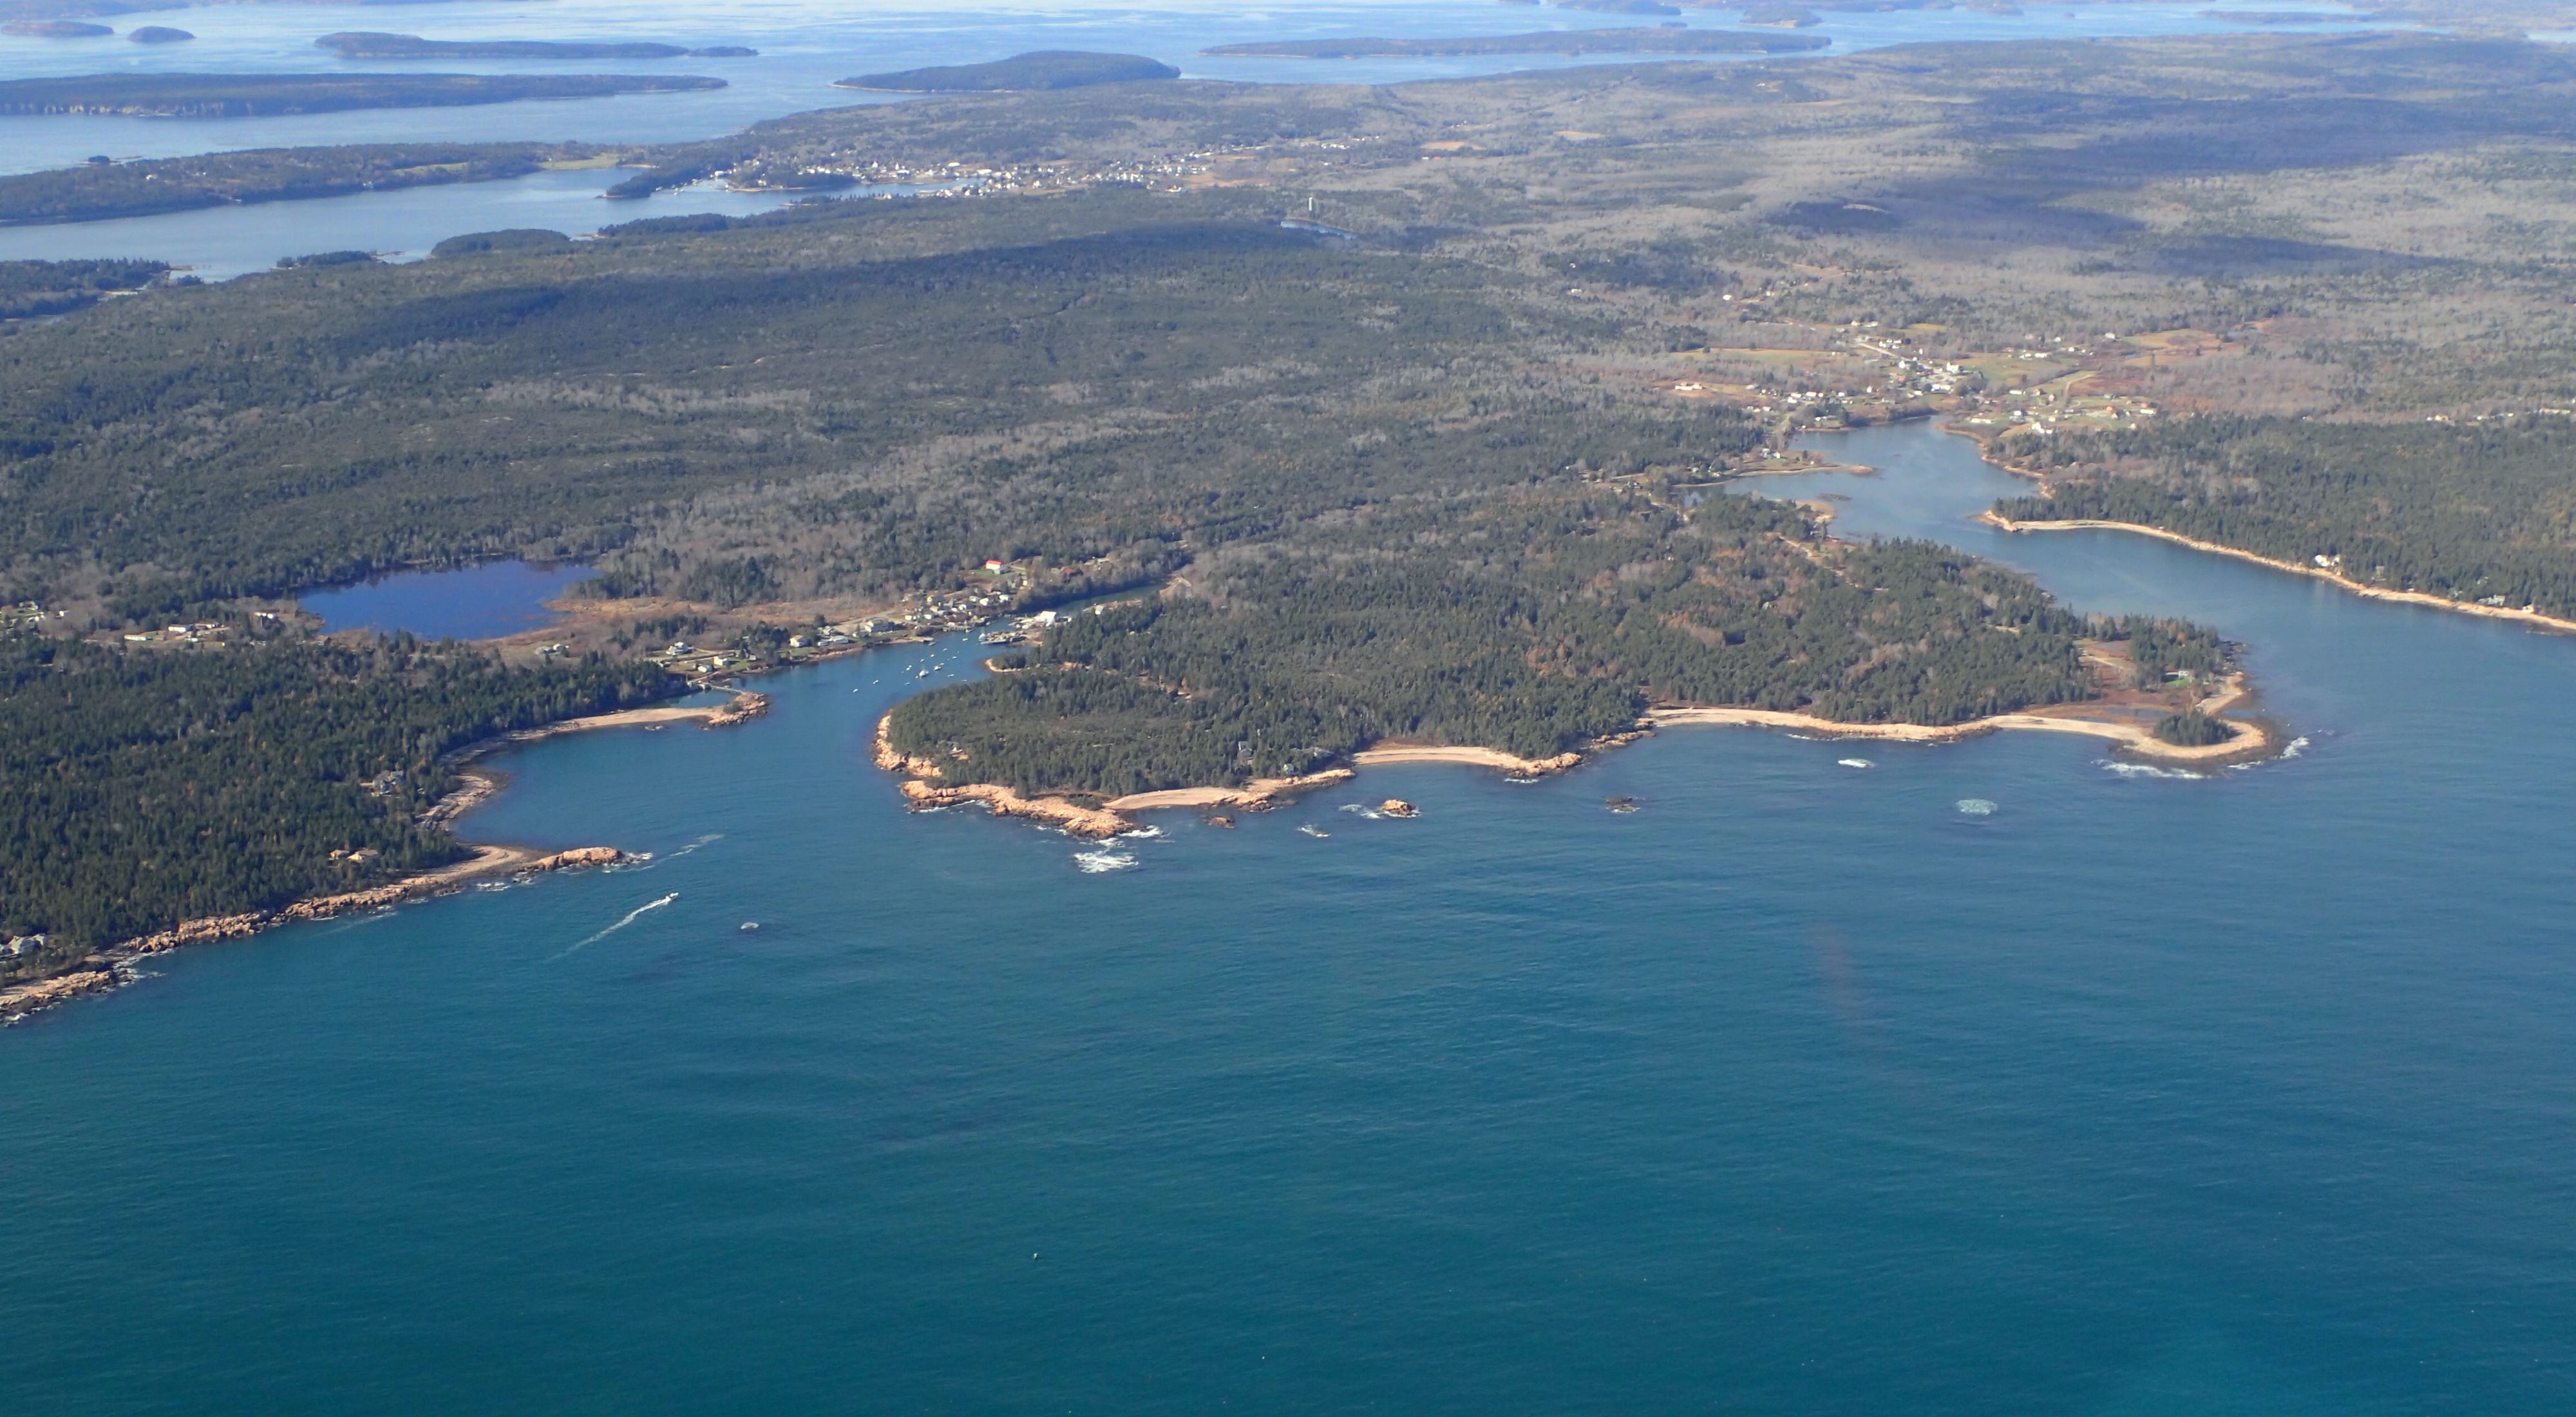 Aerial view of vast blue water framed by coastline including forest lands, islands, and small towns near the water.